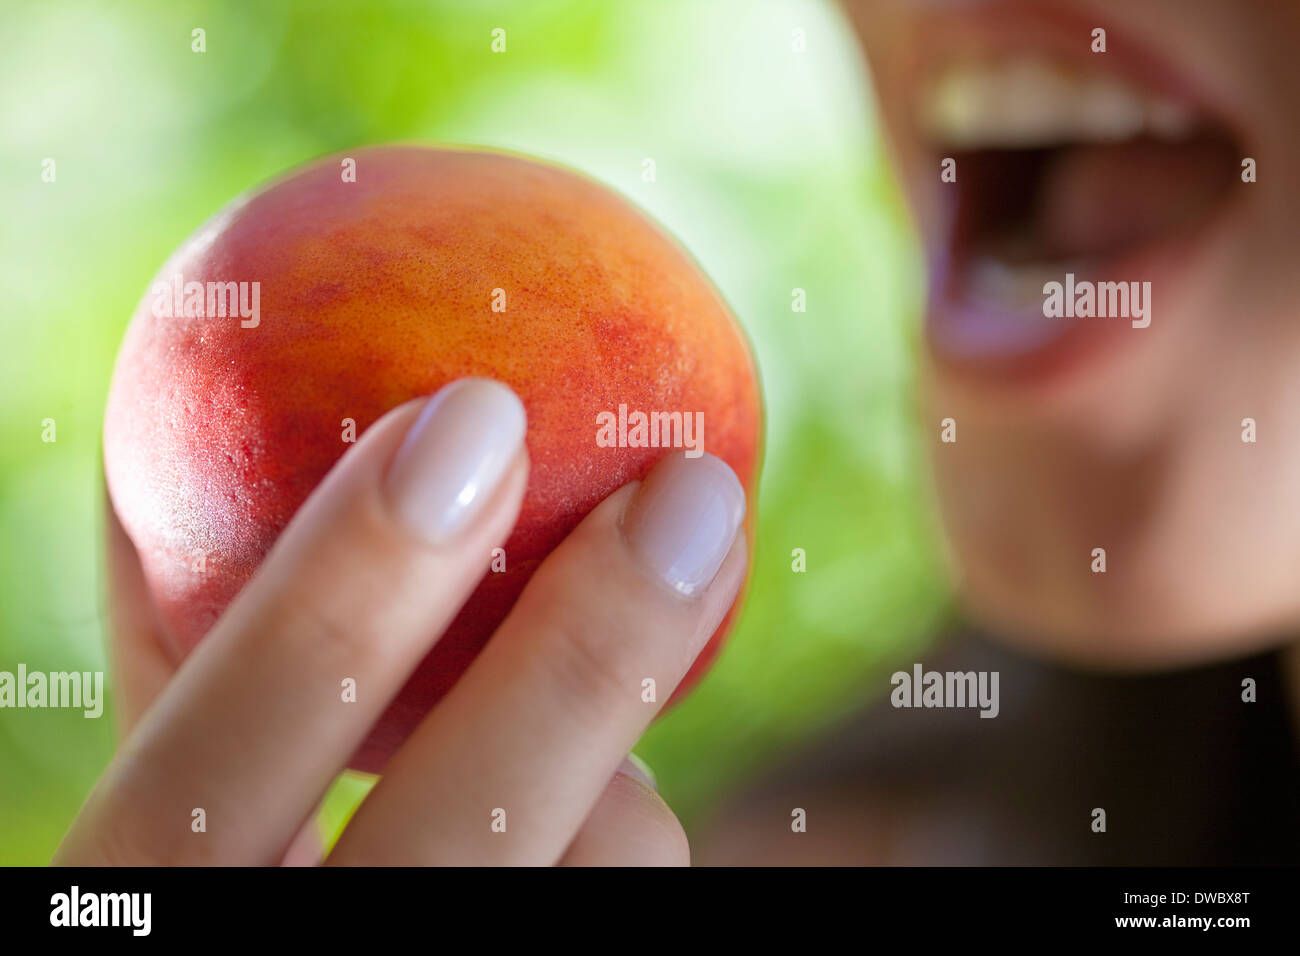 Woman holding peach to mouth Stock Photo